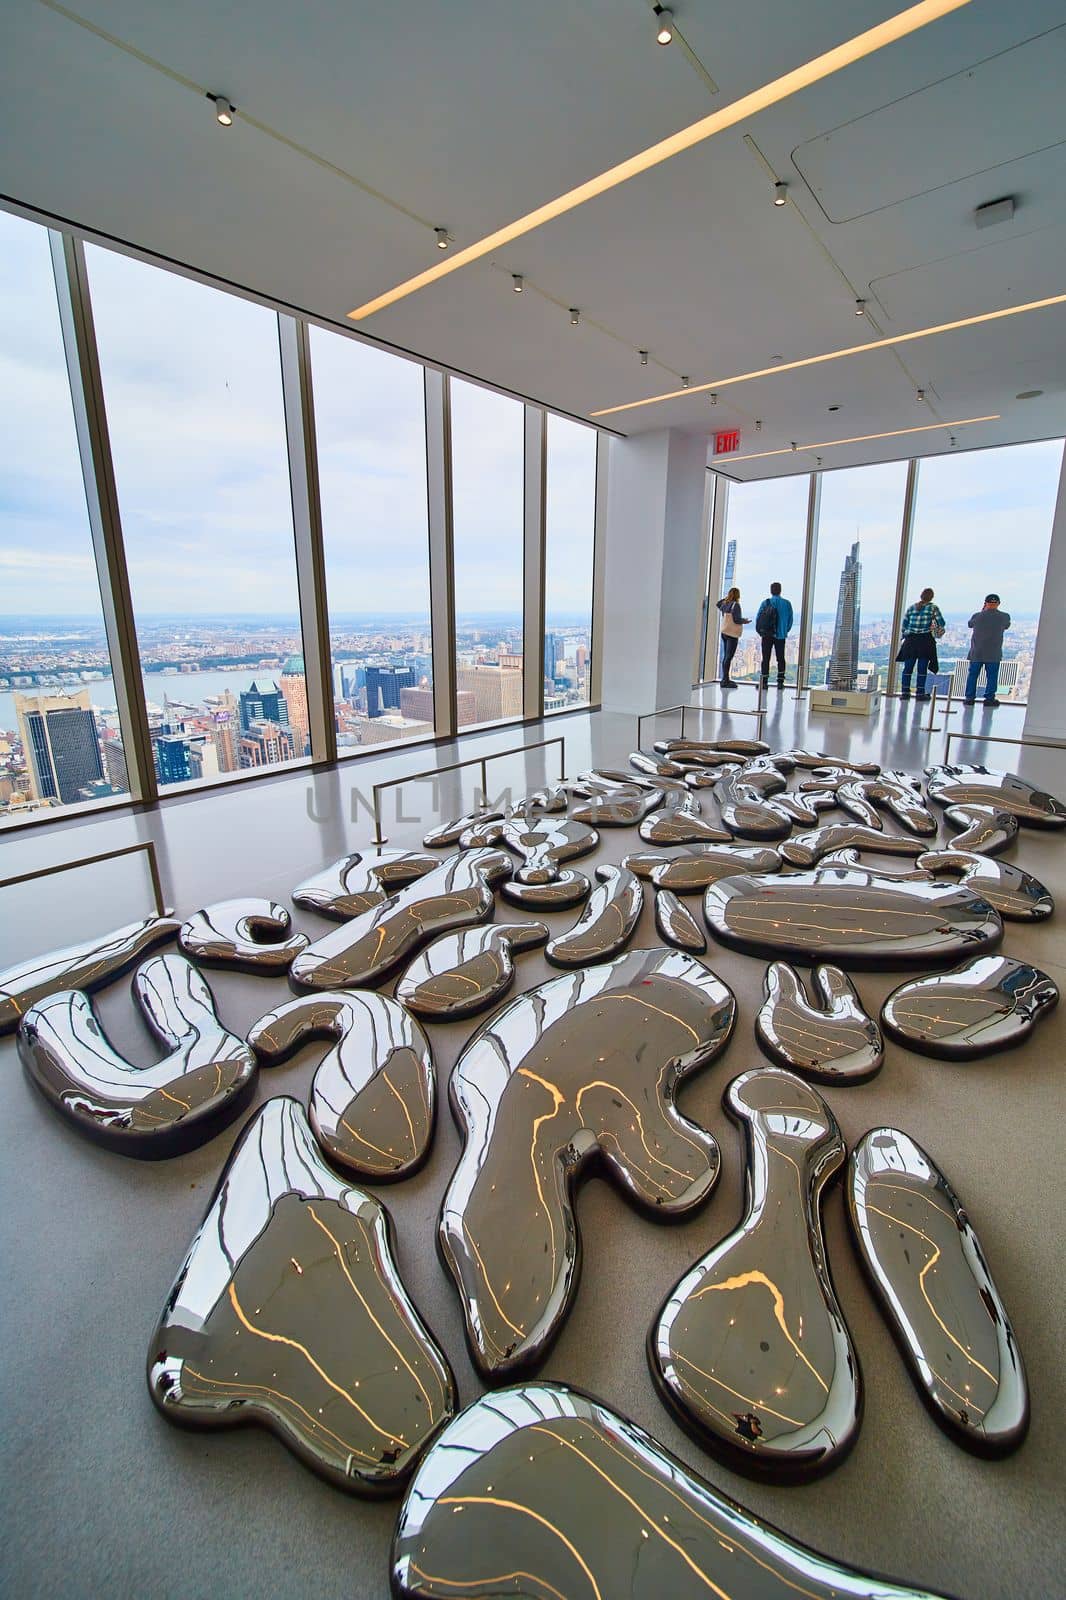 Mirror metal melted abstract shapes cover ground in exhibit overlooking New York City from above by njproductions